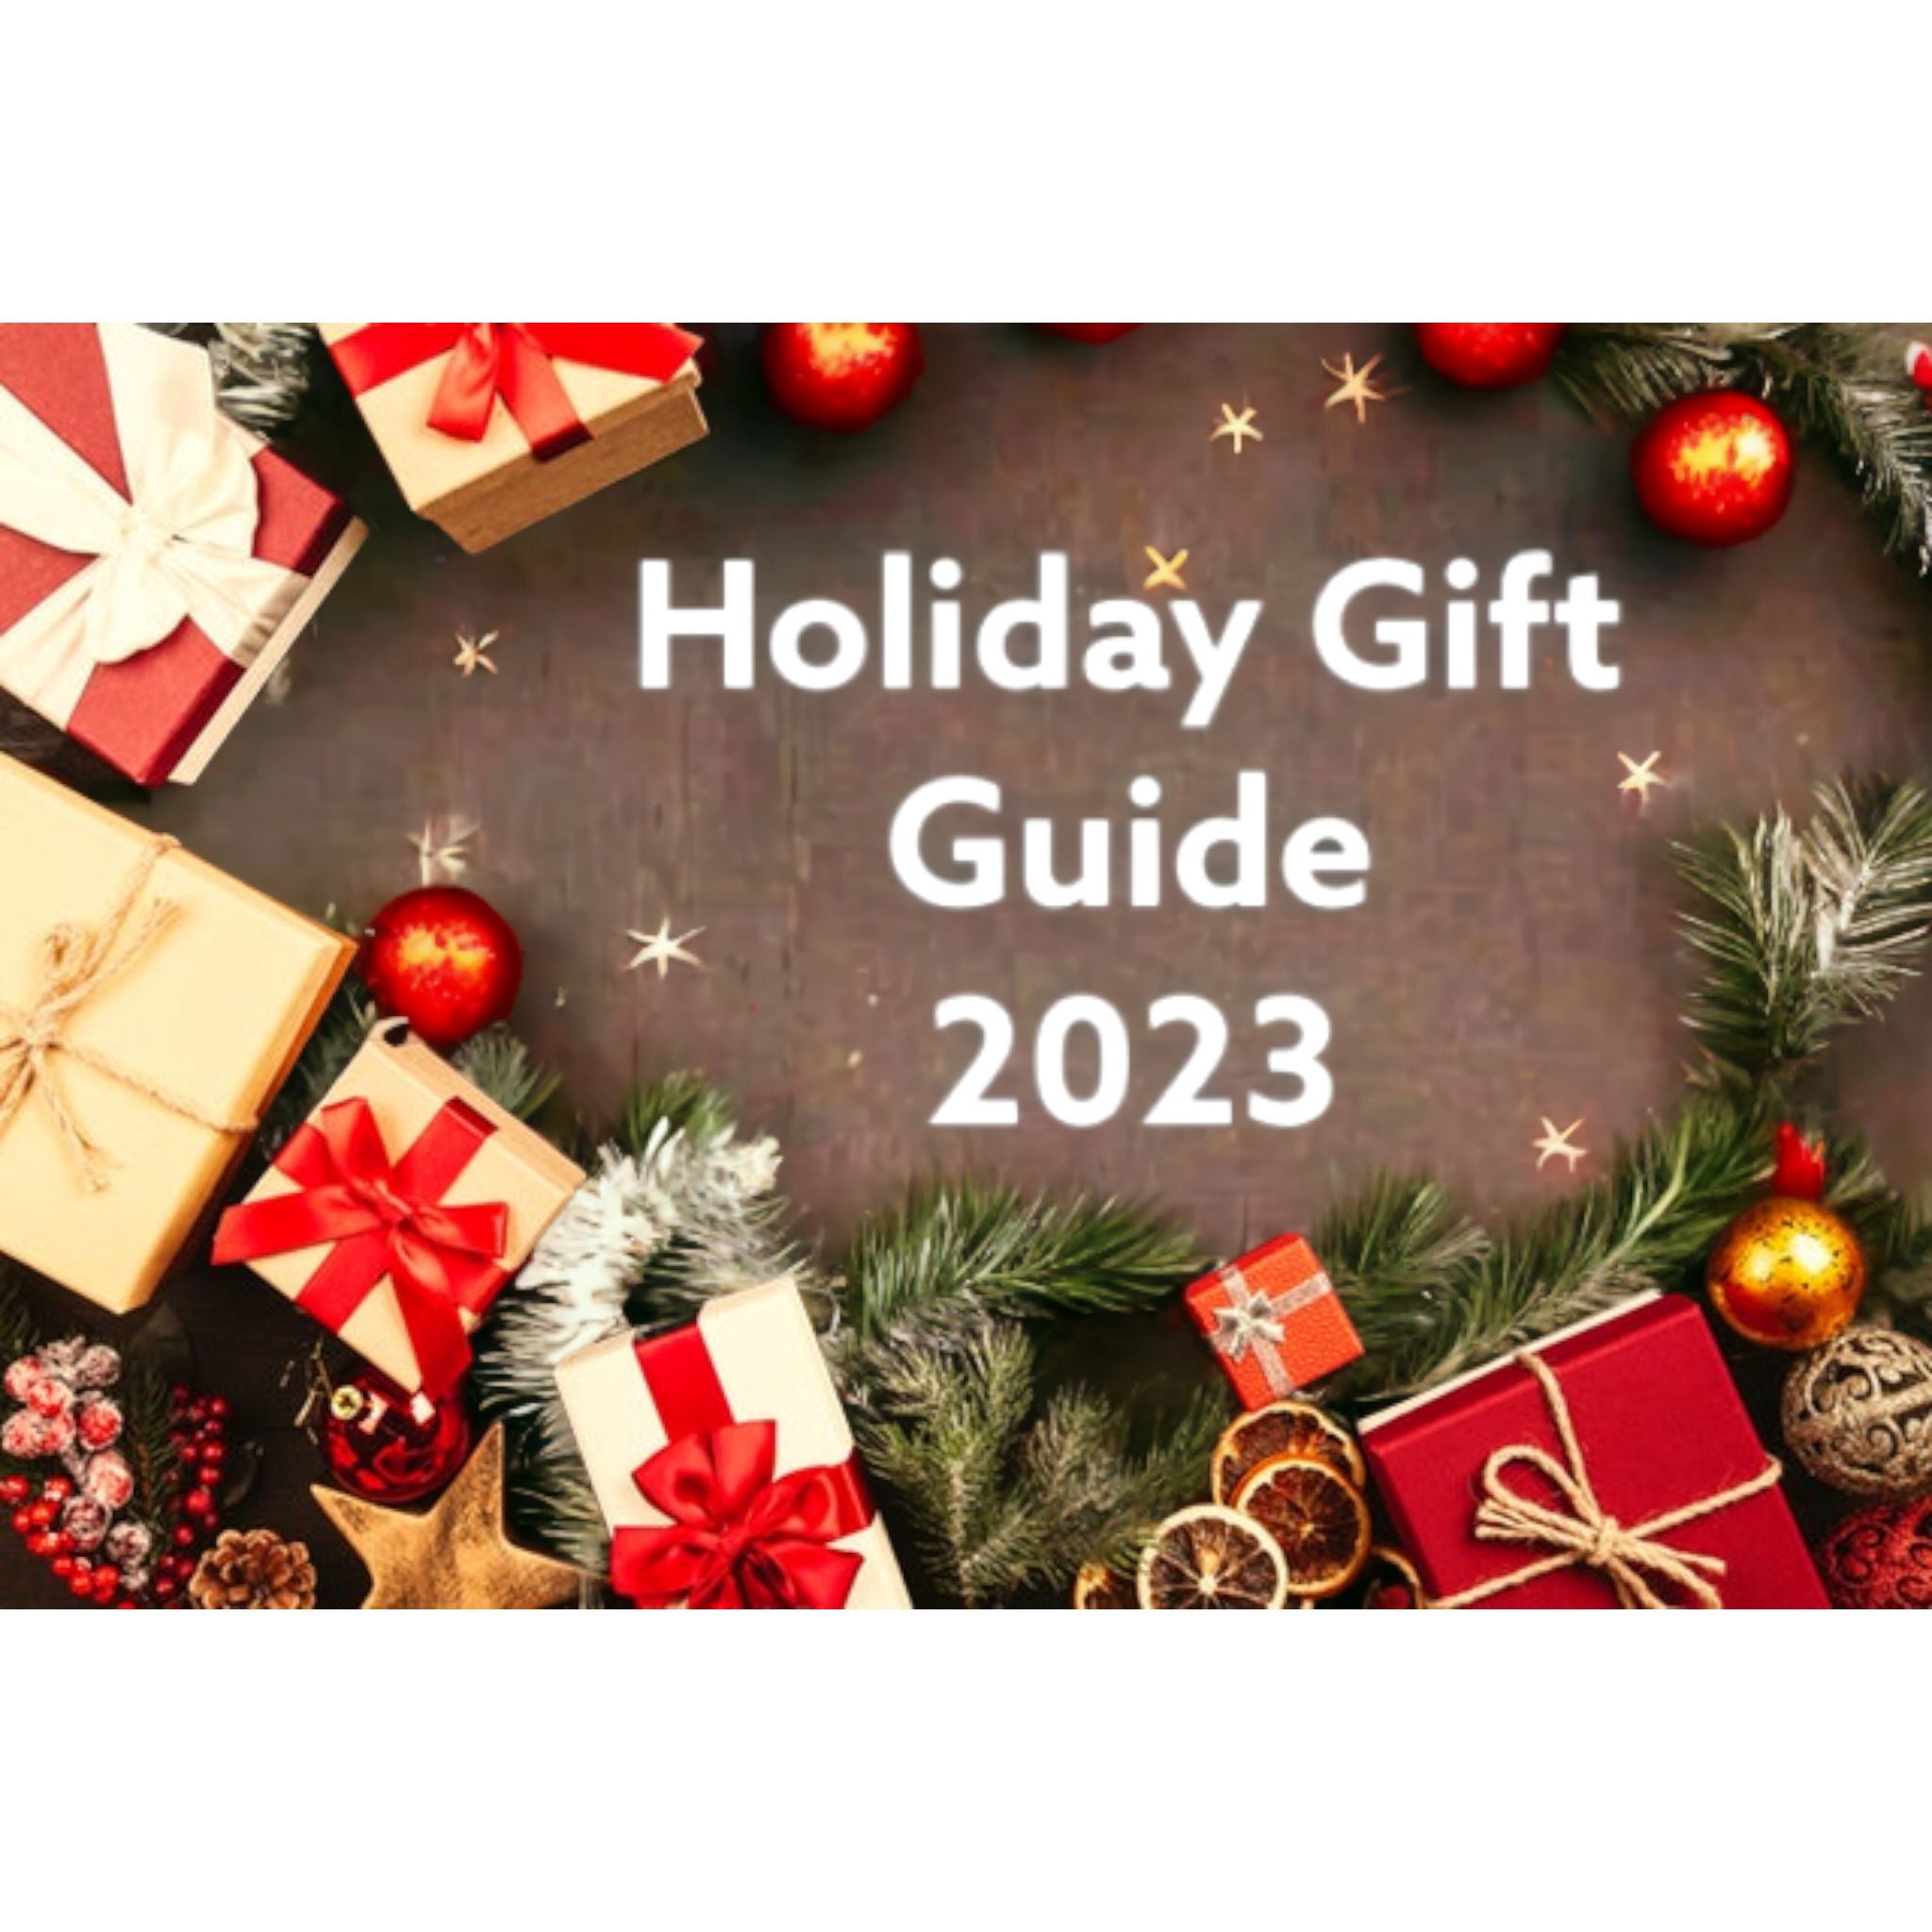 Holidays gift guide 2023